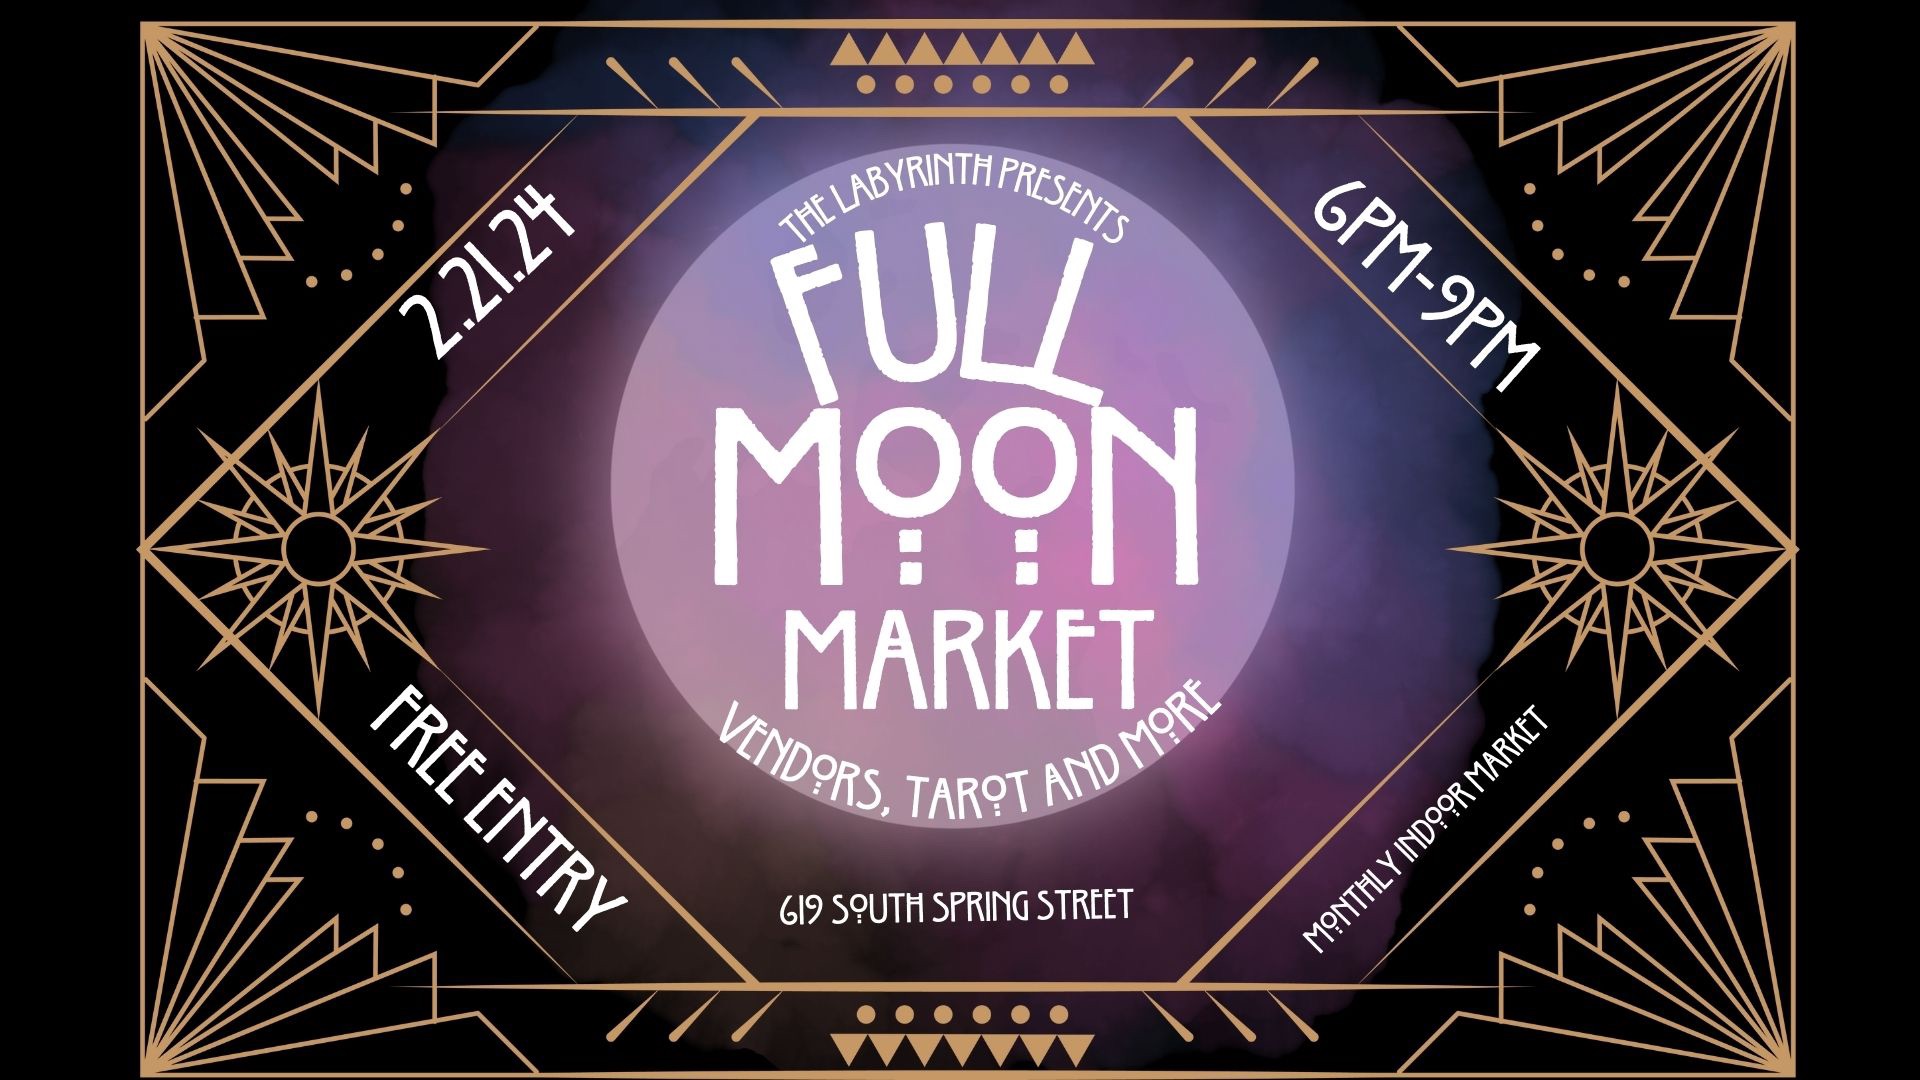 Flyer For February Full Moon Market. The text says, &ldquo;Full Moon Market. Wednesday, February 21, 2024. 6-9 PM at The Labyrinth, 619 Spring Street in Little Rock, Arkansas.